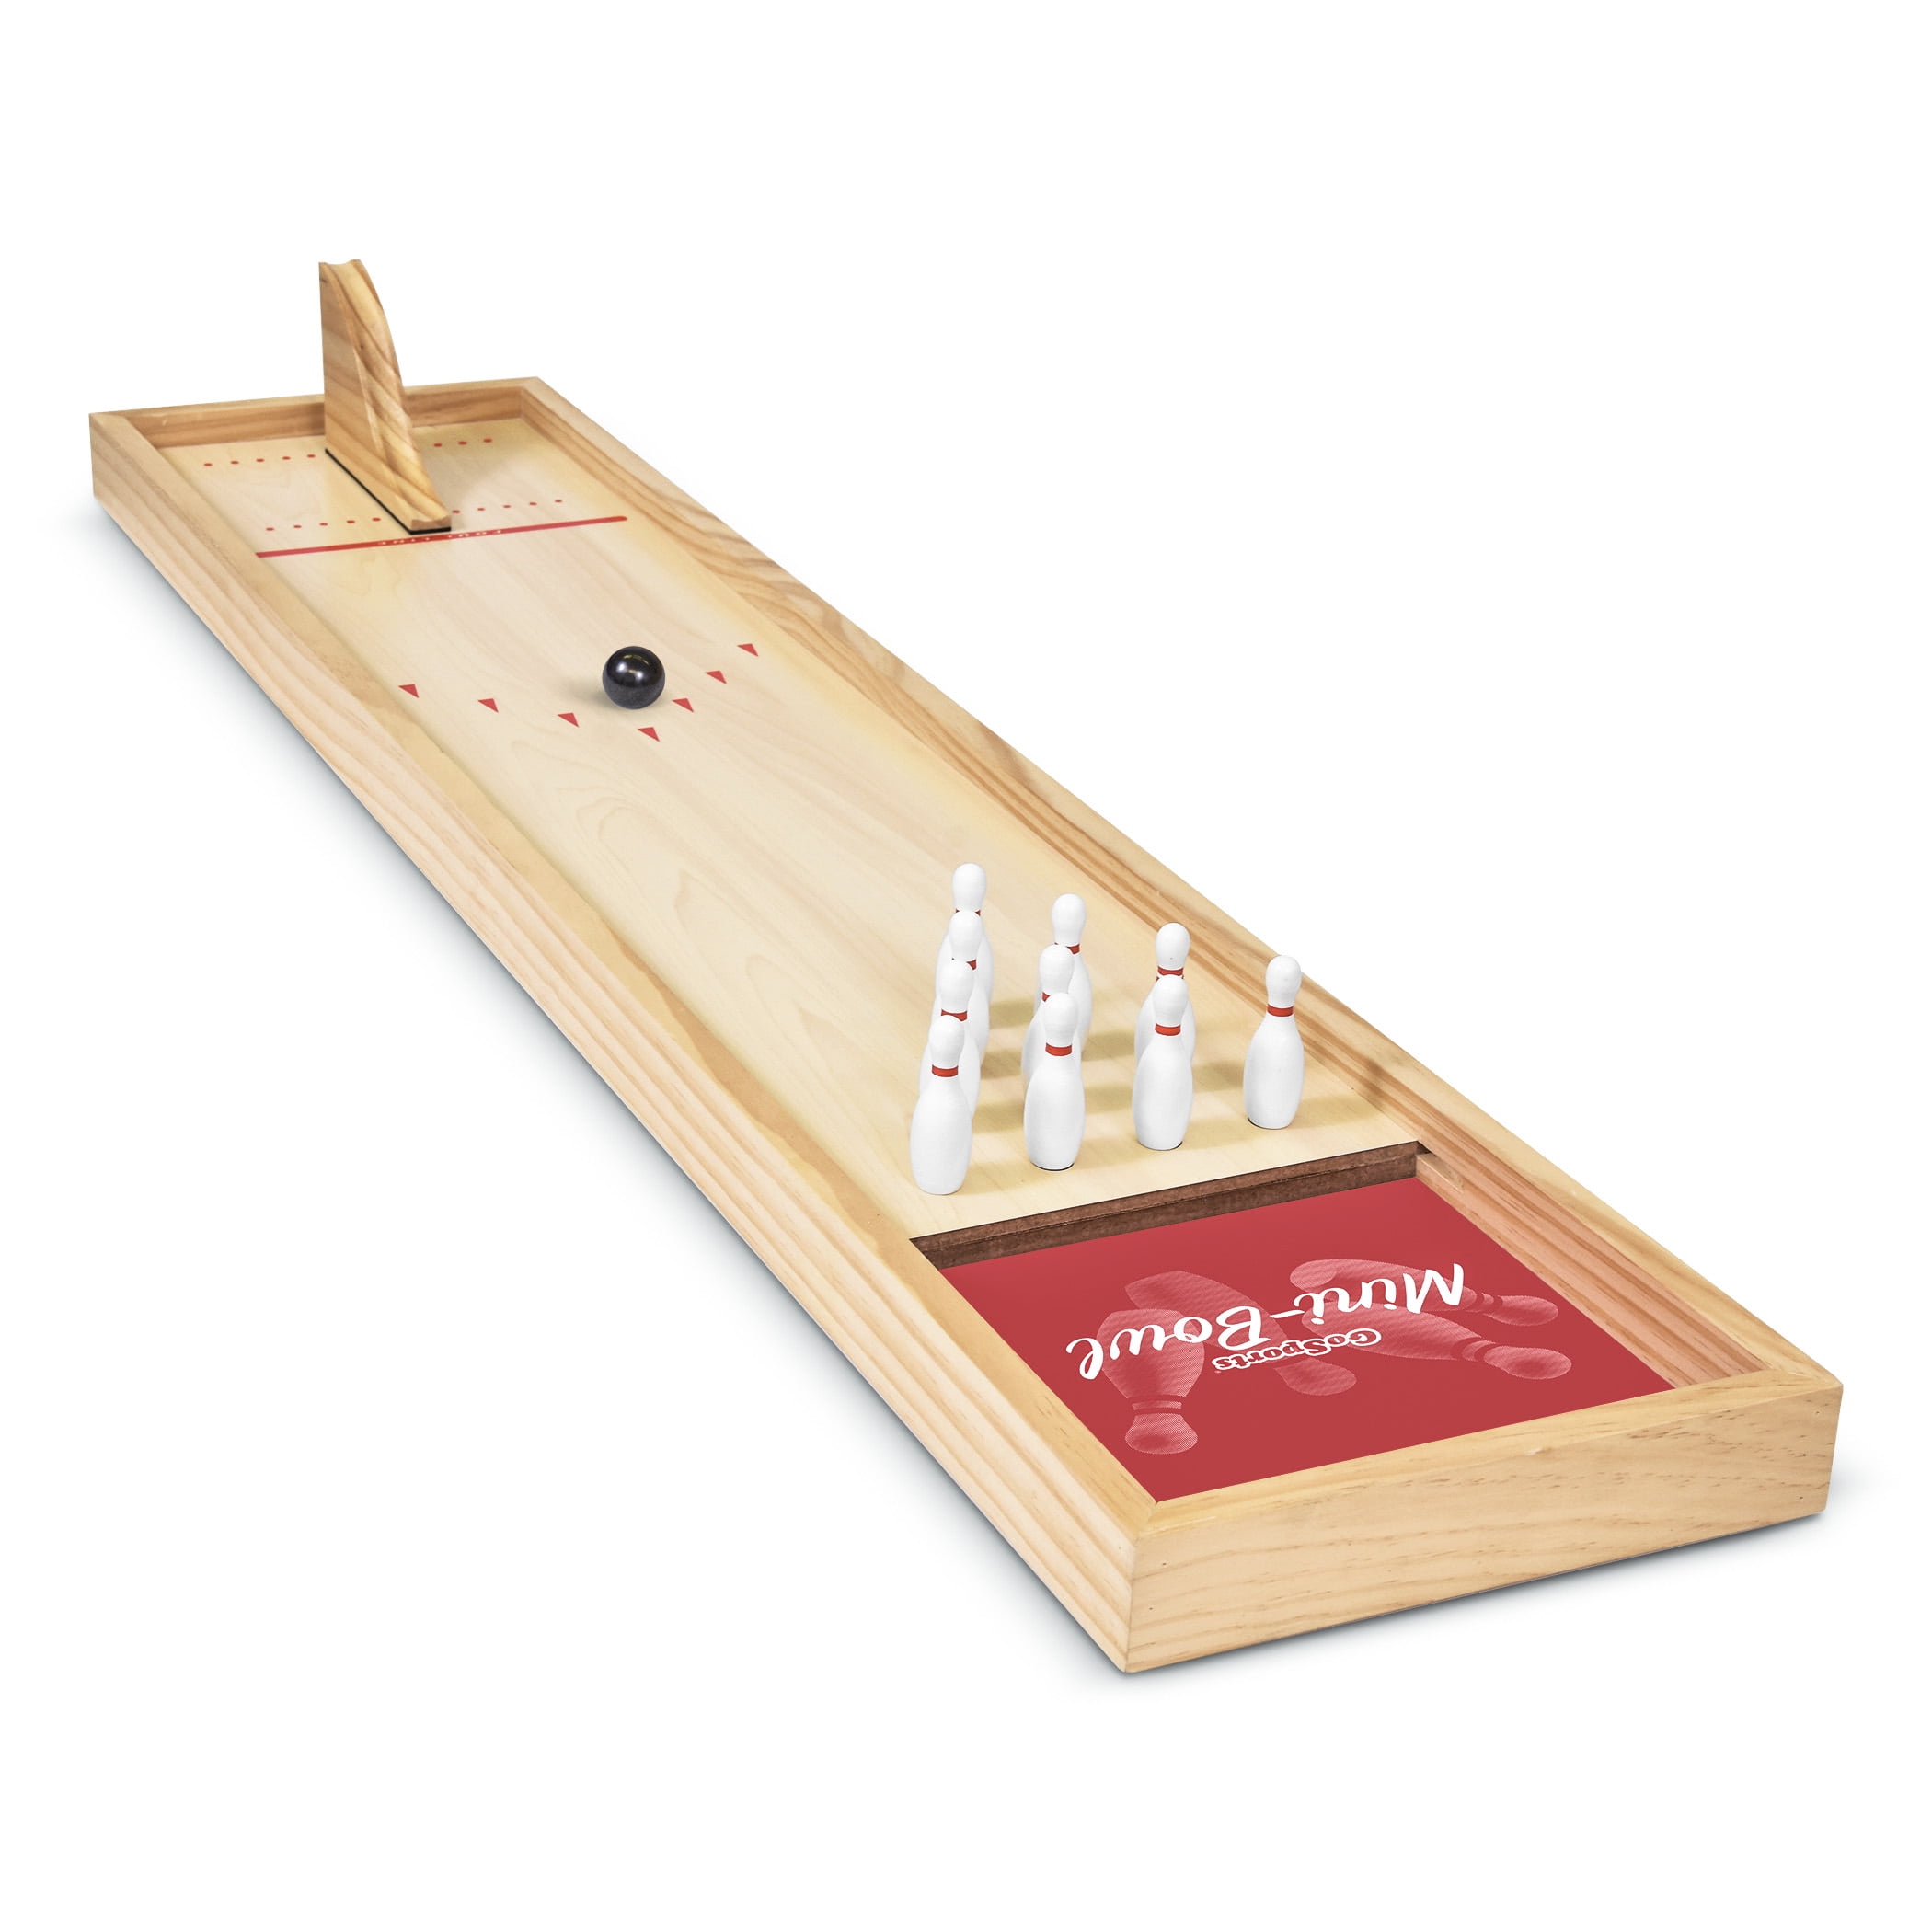 GoSports Mini Wooden Tabletop Bowling Game Set for Kids and Adults - Includes 1 Bowling Alley Board, 1 Launch Ramp, 2 Mini Bowling Balls, 10 Pins and Dry Erase Scorecard